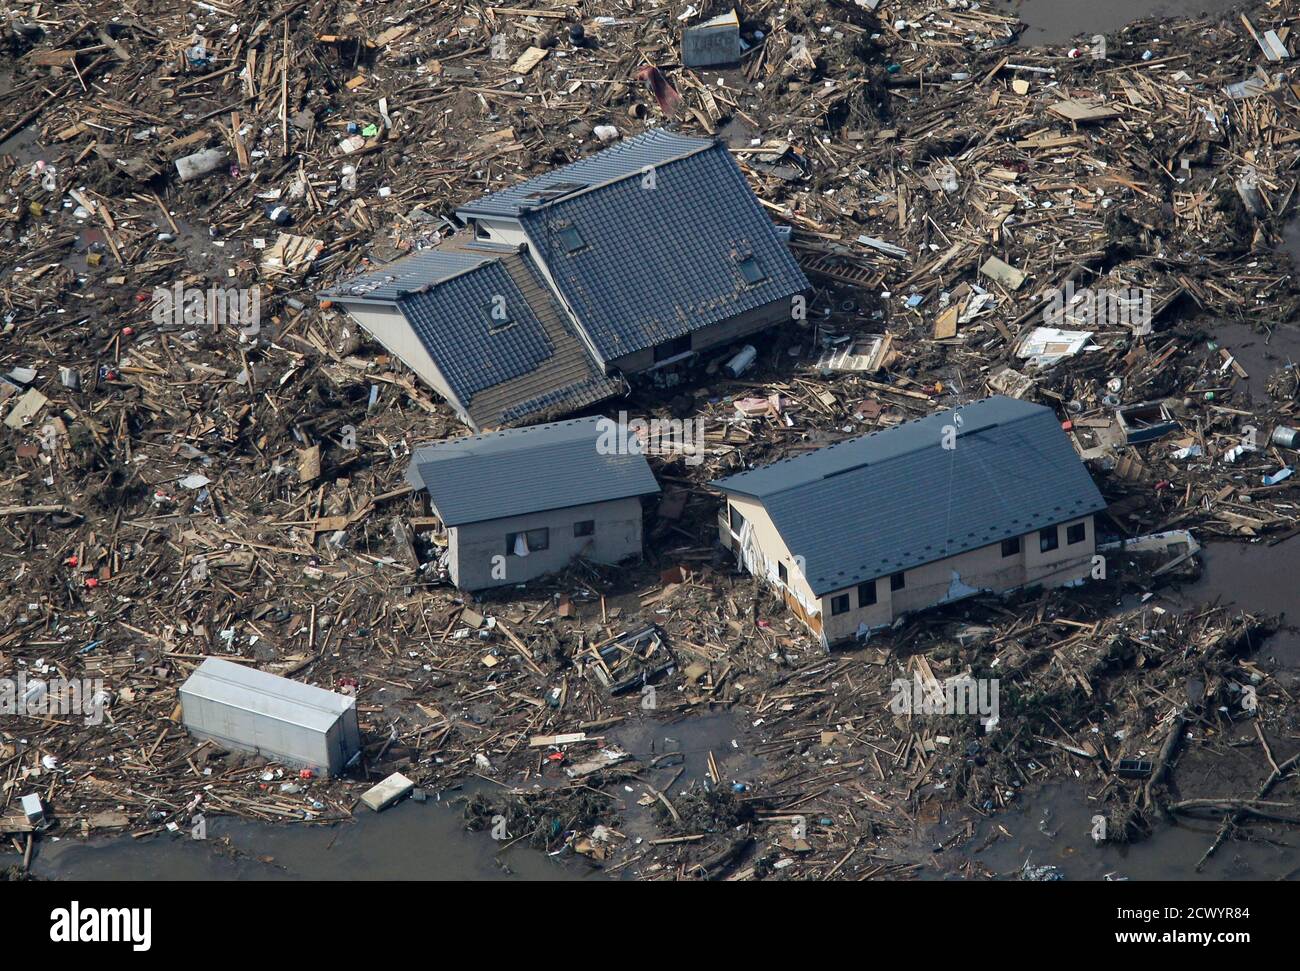 An Aerial View Of The Earthquake And Tsunami Damage At The Coastal Town Of Minami Soma March 12 11 Japan Confronted Devastation Along Its Northeastern Coast On Saturday With Fires Raging And